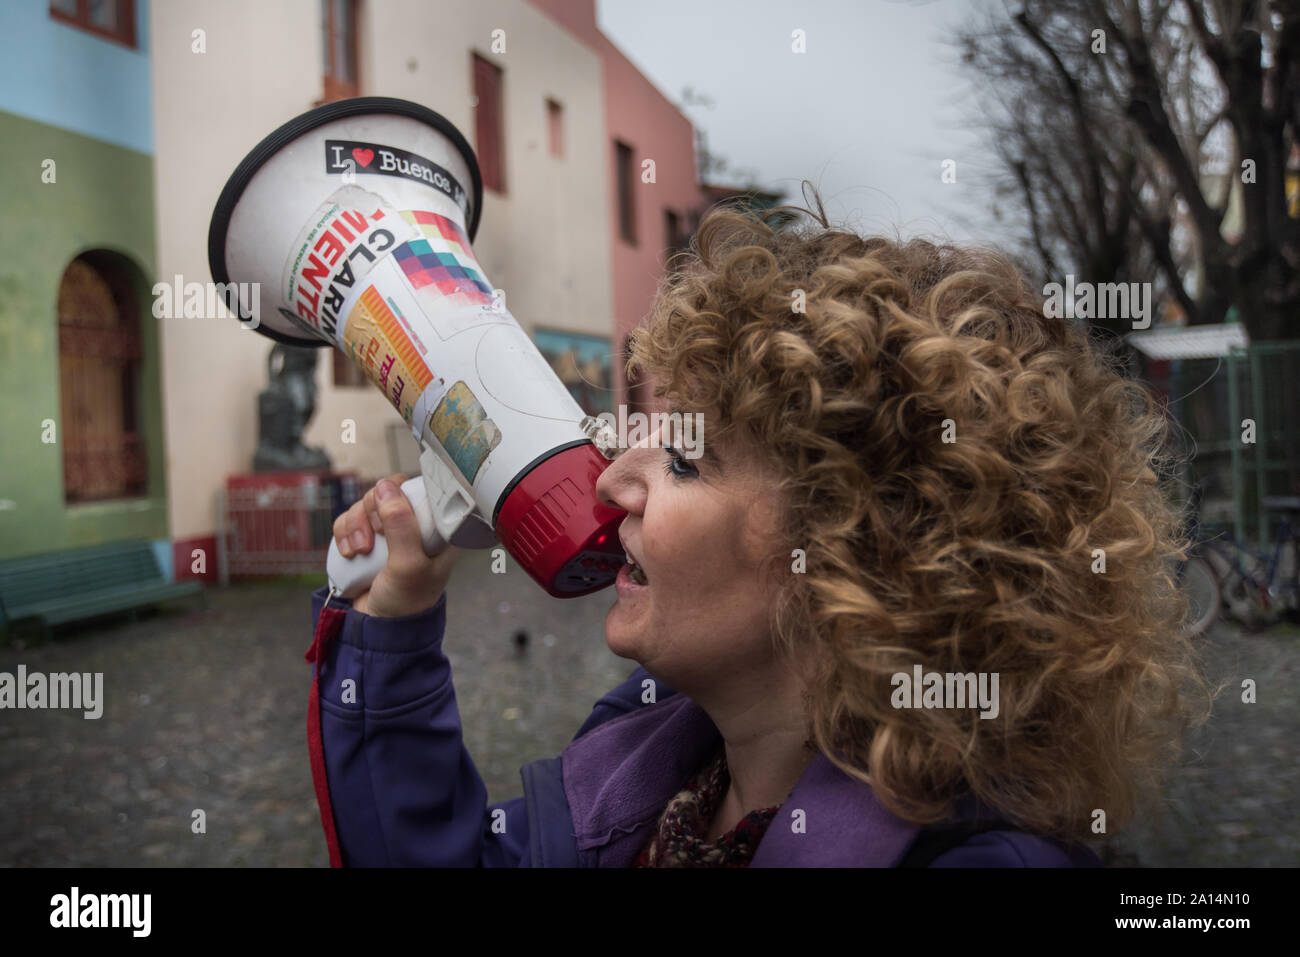 Buenos Aires, Argentina - July 31 2016: Rainy days in the neighborhood of La Boca. A woman speaker advertising and promoting a play with a megaphone. Stock Photo